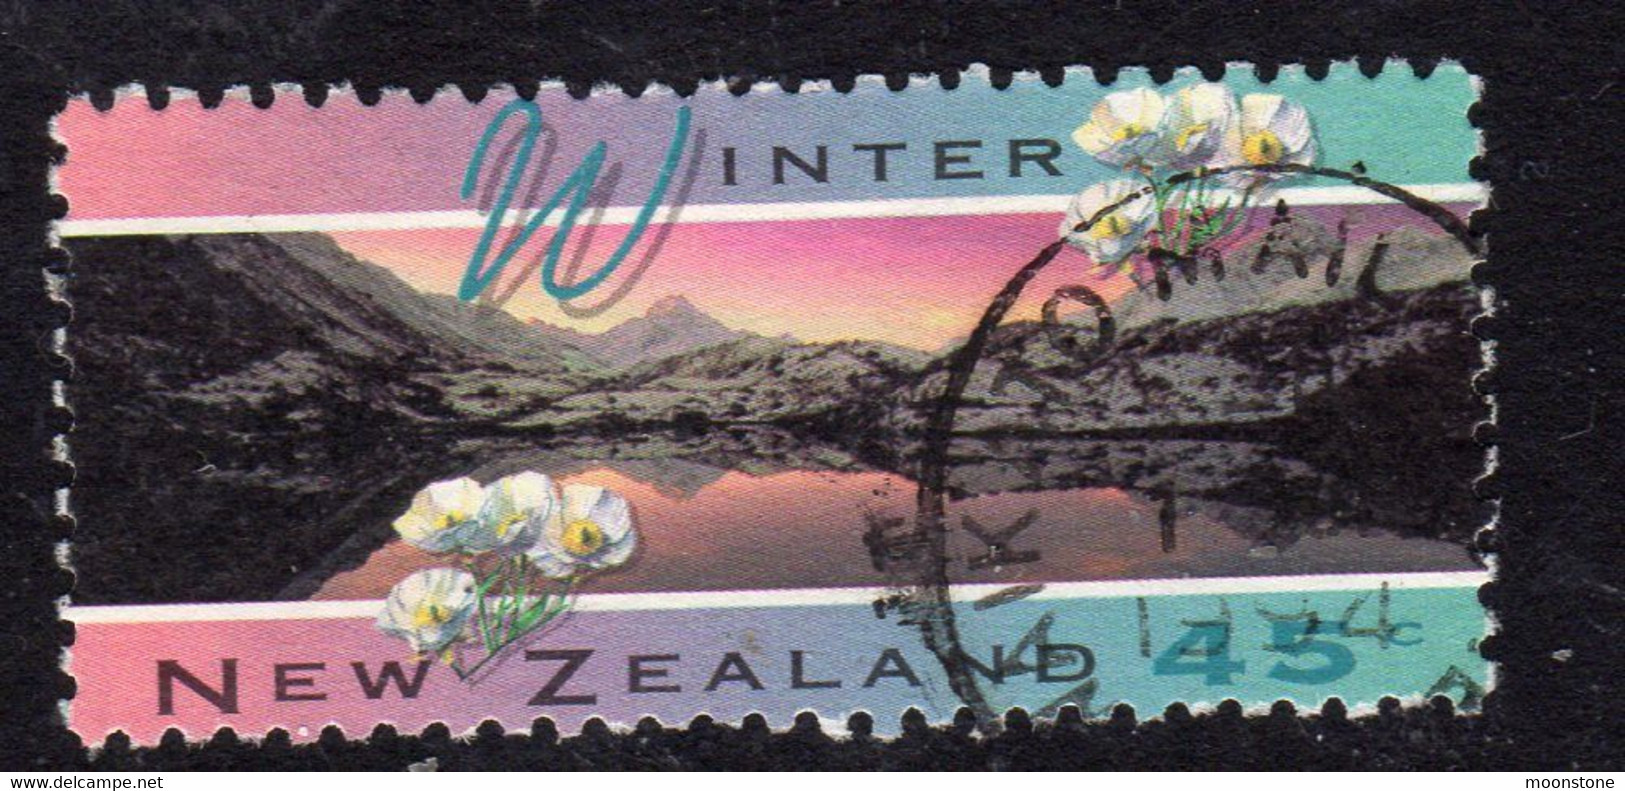 New Zealand 1994 The Four Seasons 45c Value, Used, SG 1793 - Used Stamps